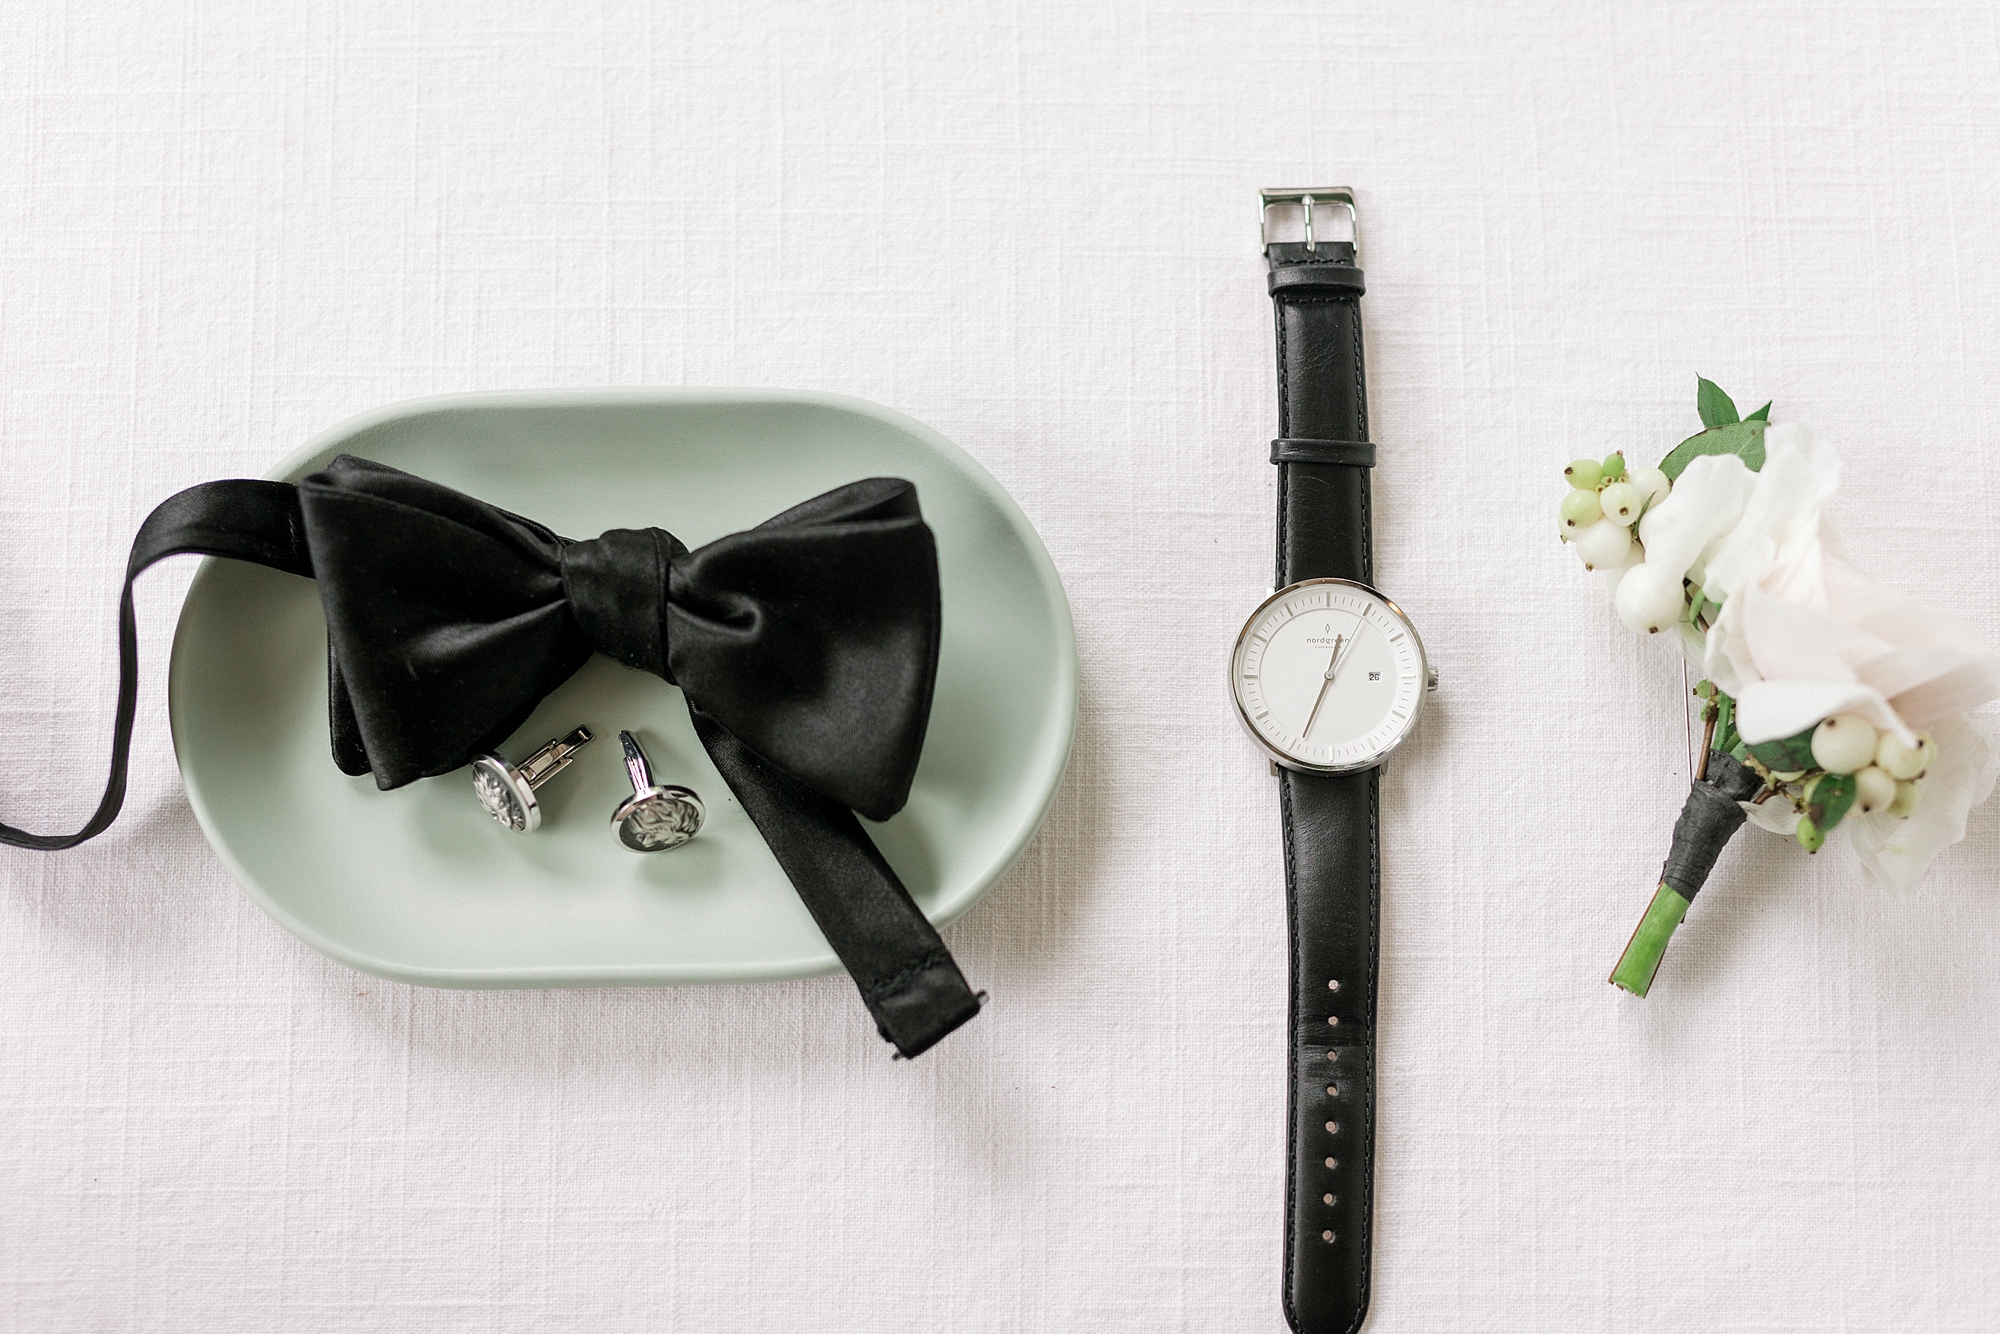 groom's black tie and watch for luxurious summer wedding